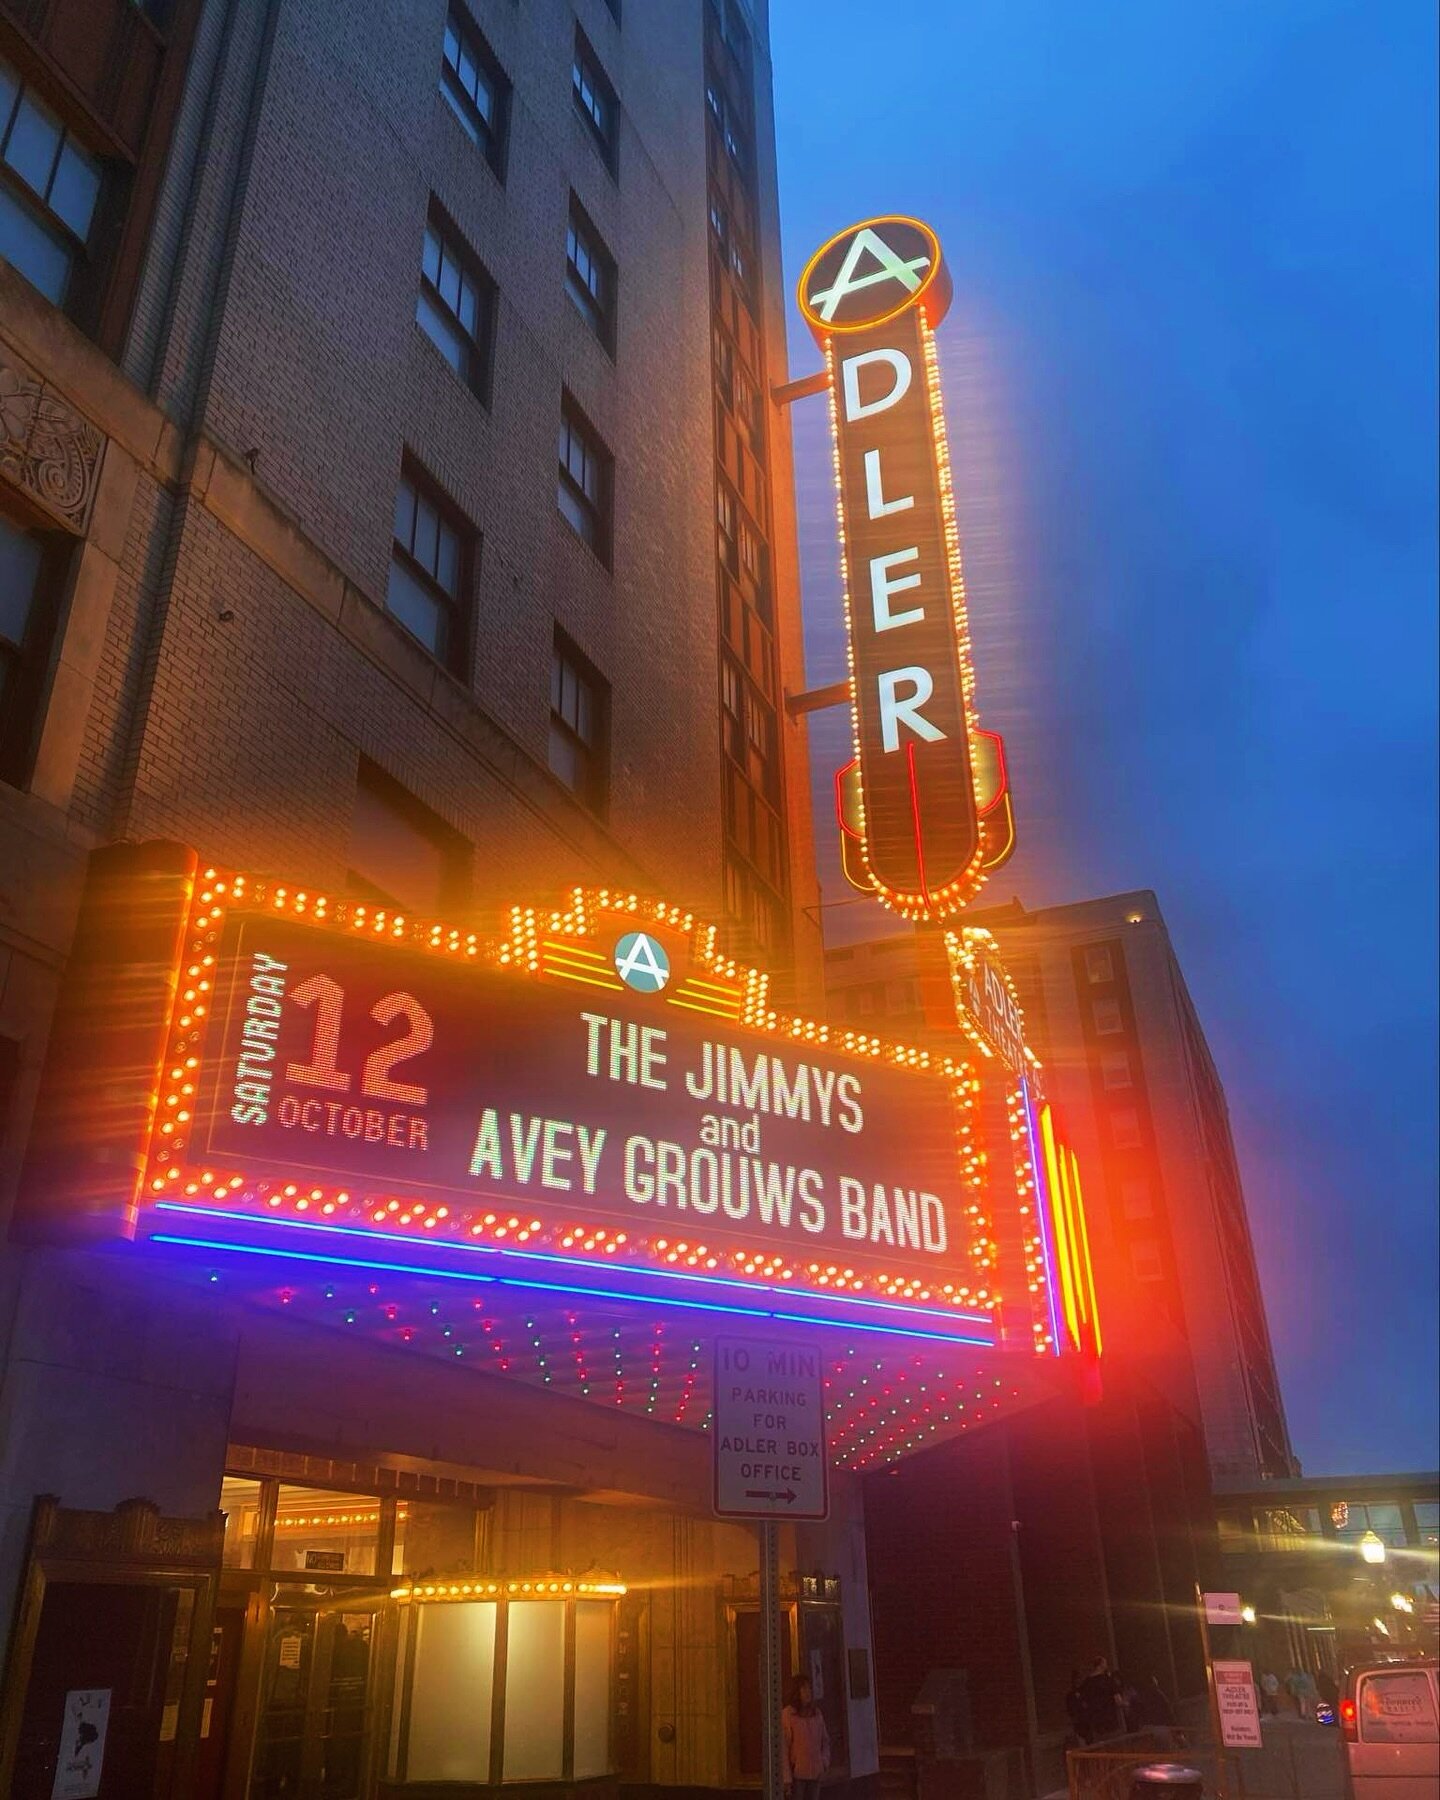 Nothing like having your name in lights! It&rsquo;ll be an incredible night. And we have a few tricks up our sleeves for this show. 😉
🎟️ directly at @adlertheatredavenport box office or online or through us (but only until April 15 with AGB). 
Help